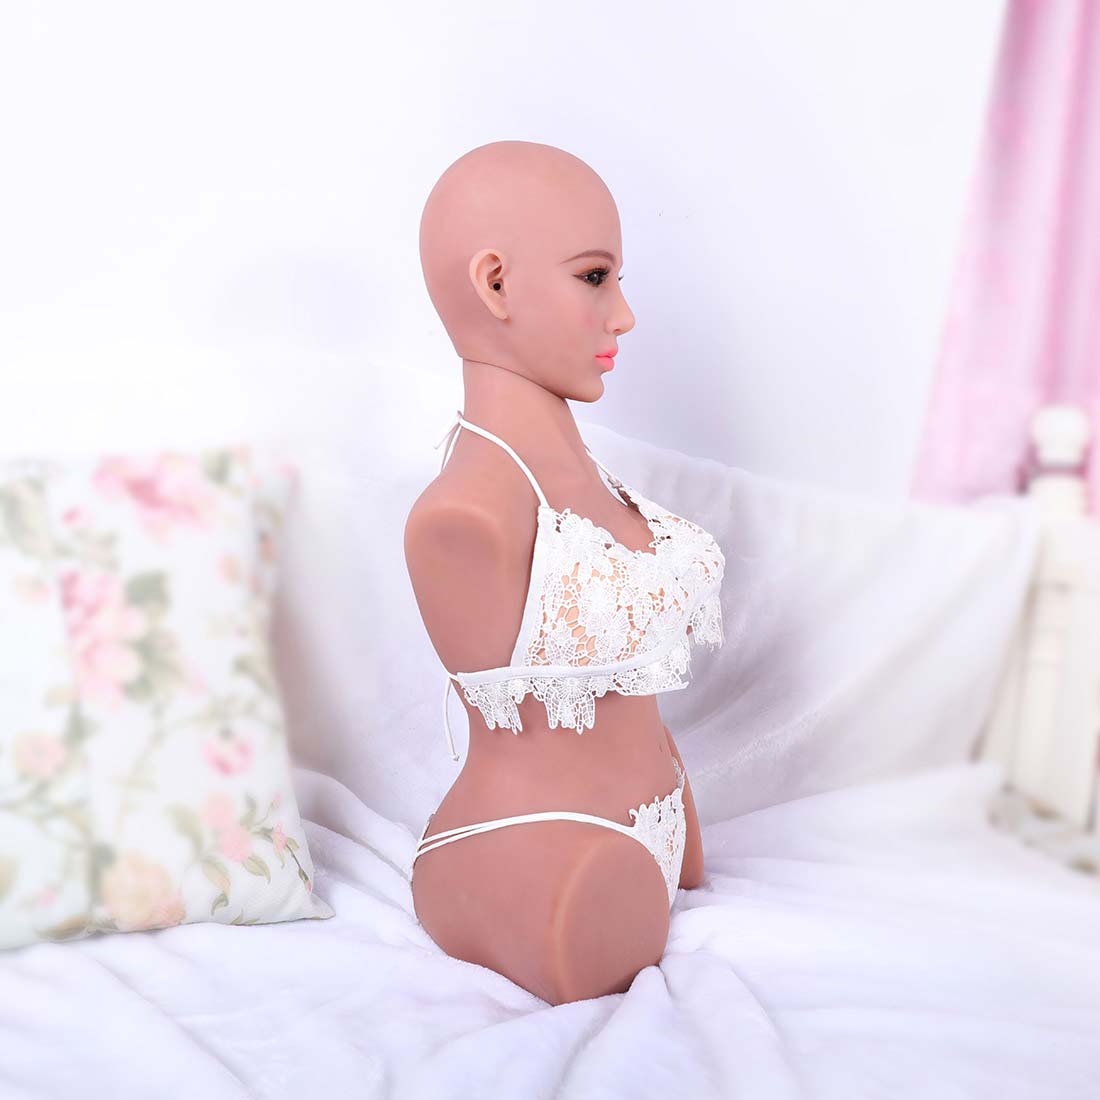 In Stock Real Sex Doll Torso Breasts Pussy AnalSex Toy Salry - CSDoll 